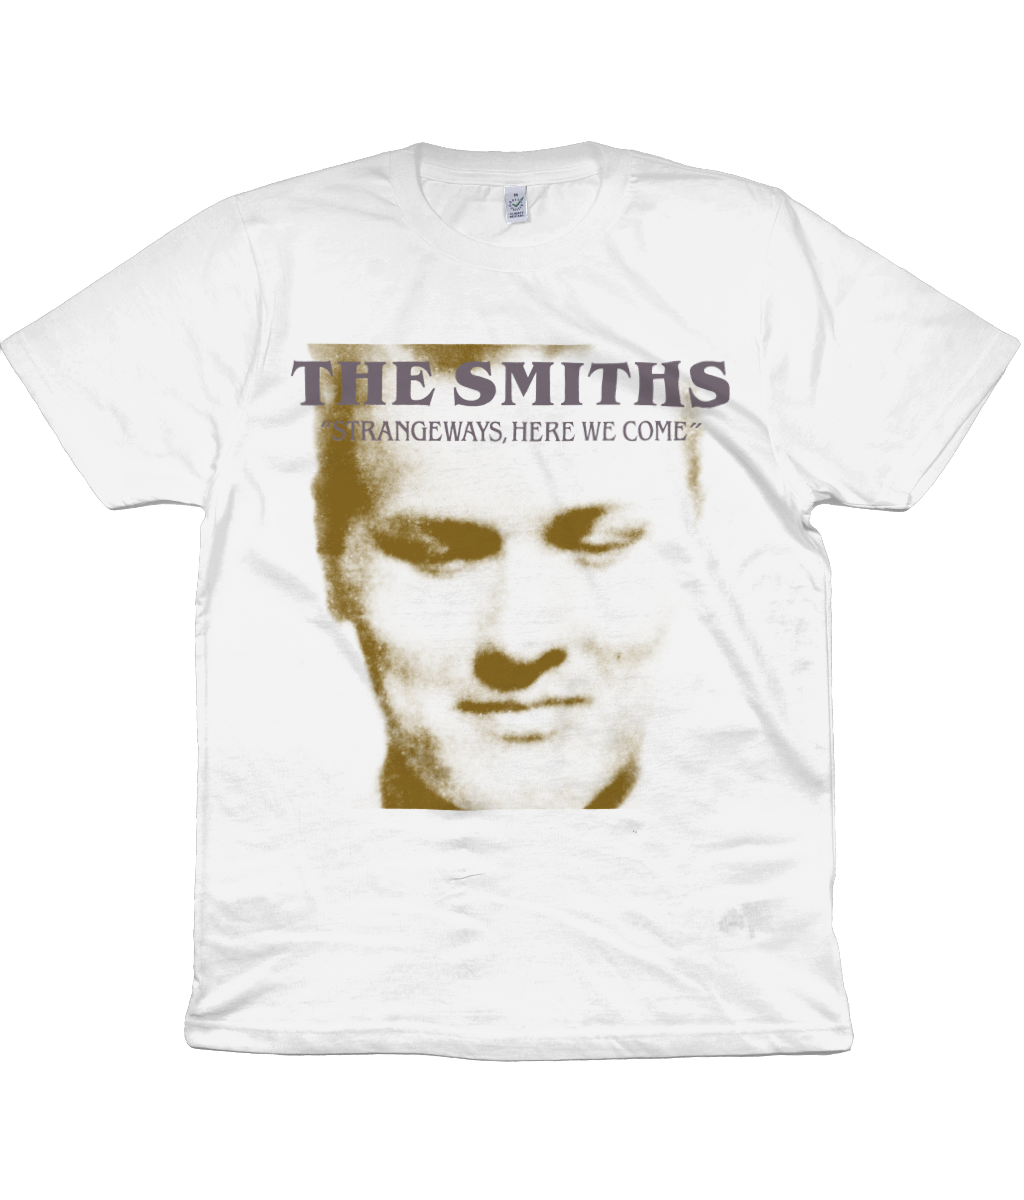 THE SMITHS - STRANGEWAYS, HERE WE COME - Japanese - Front print